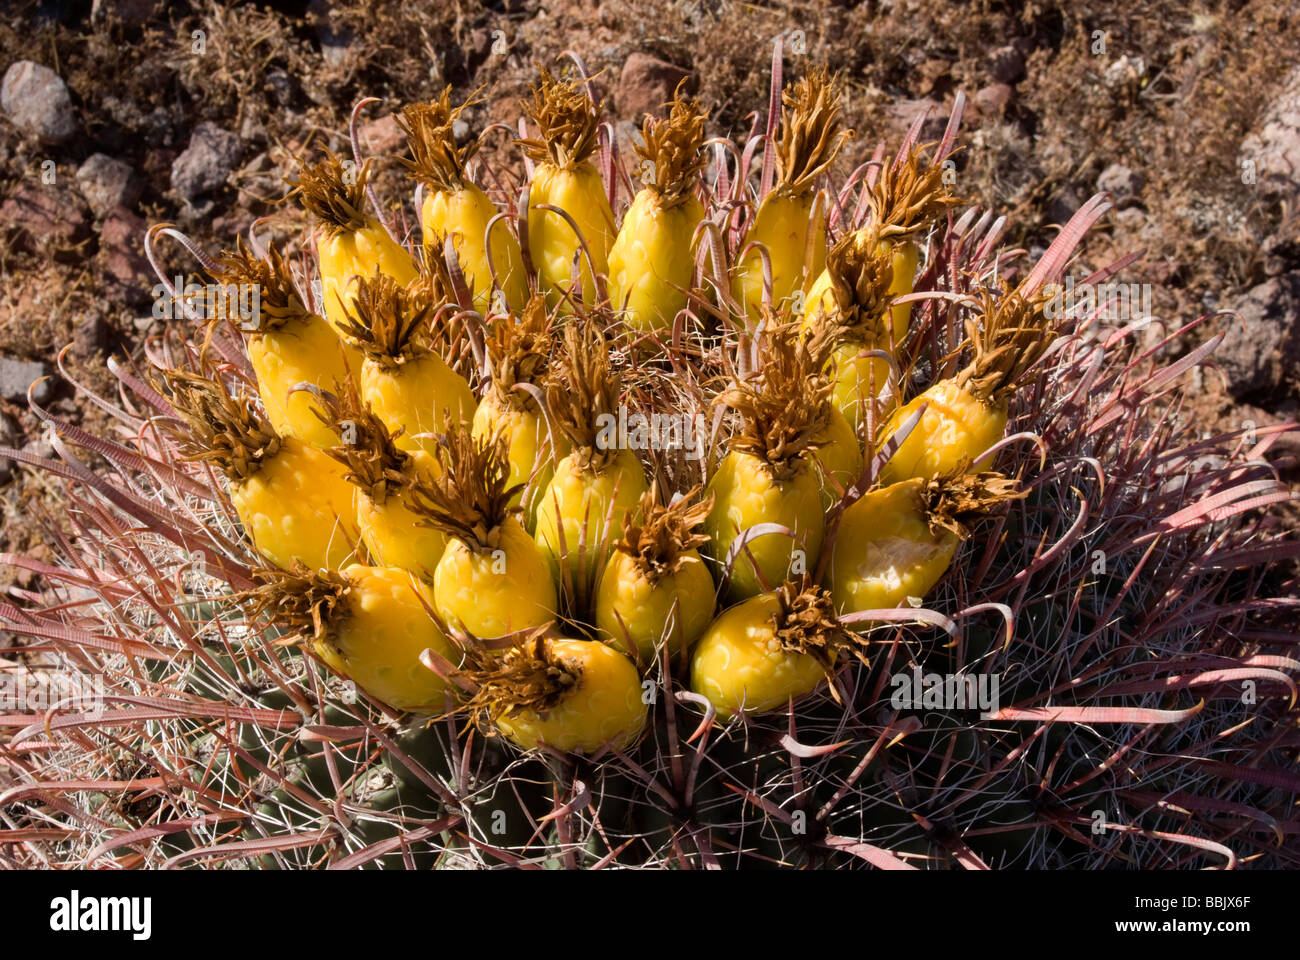 USA Arizona Picacho Button hook Cactus flowers in bloom Picacho Peak State Park Stock Photo